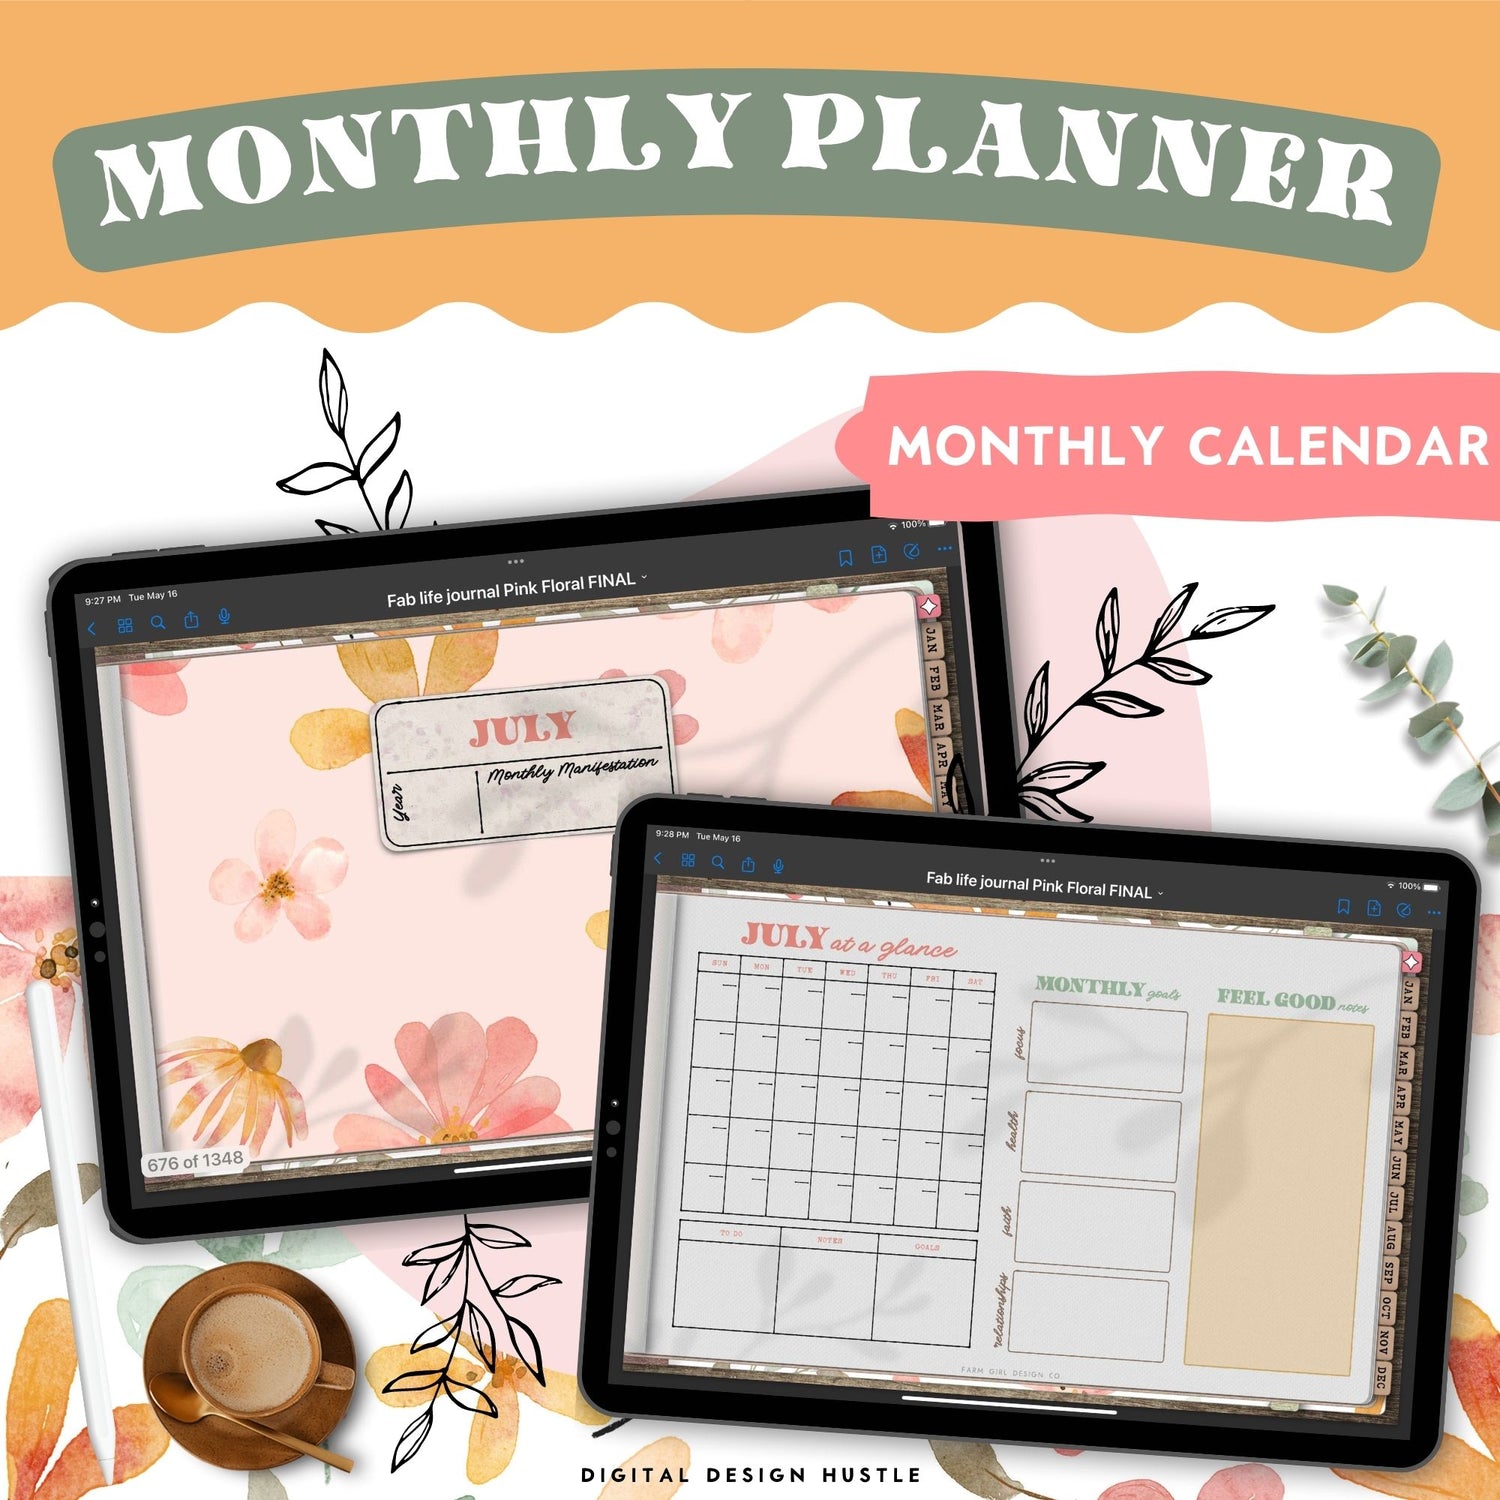 Take care of your mind, body and health with this floral digital gratitude journal. Use this beautifully designed planner to record and take note of your mental health. This self-care planner has 1348 hyperlinked pages for monthly and daily journaling. Track your gratitude for each day of the year.